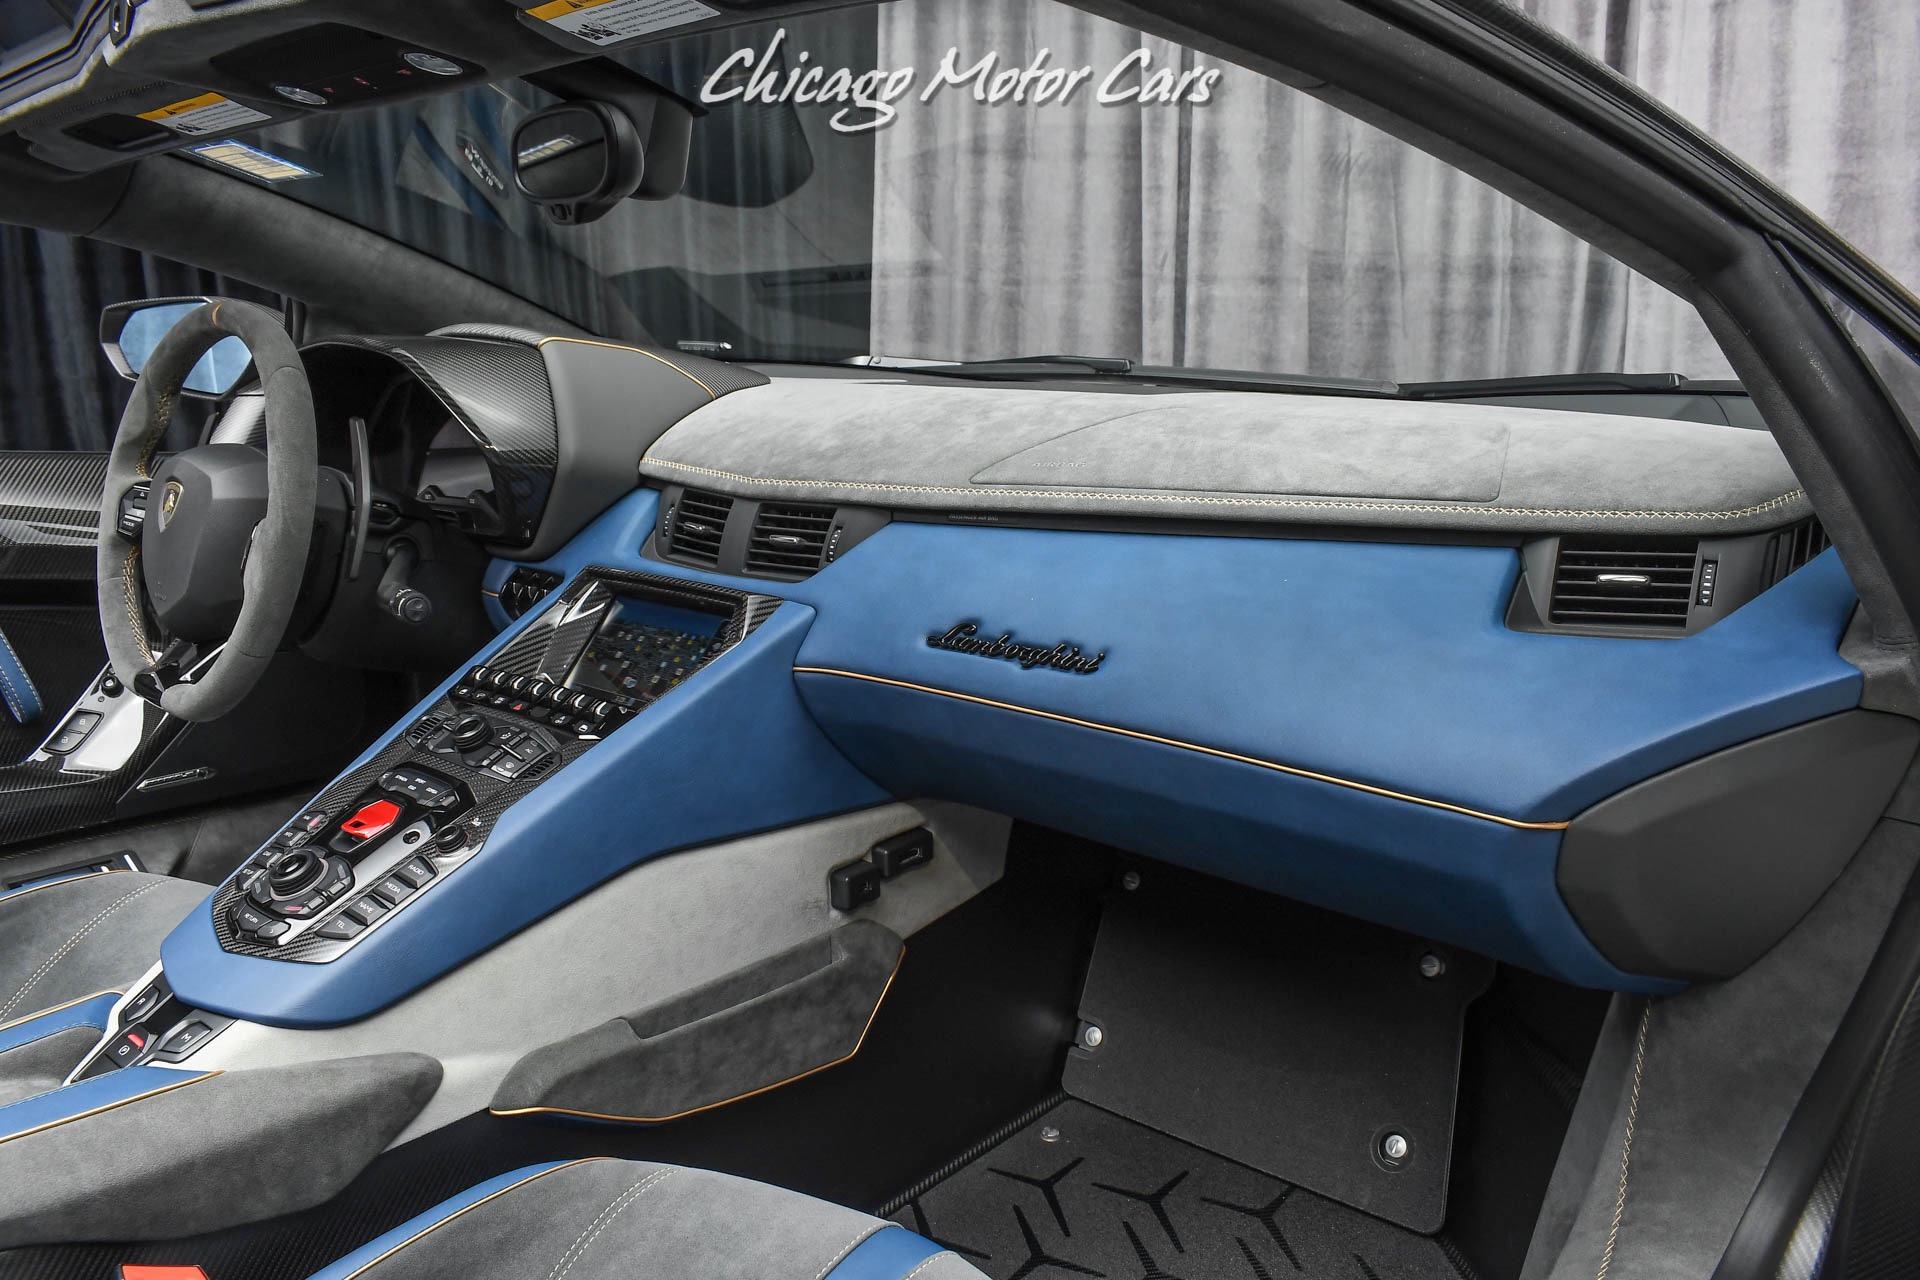 Used-2020-Lamborghini-Aventador-LP770-4-SVJ-63-Roadster-Extremely-RARE-Blu-Emera-163-Made-Collector-Quality-FULL-PPF